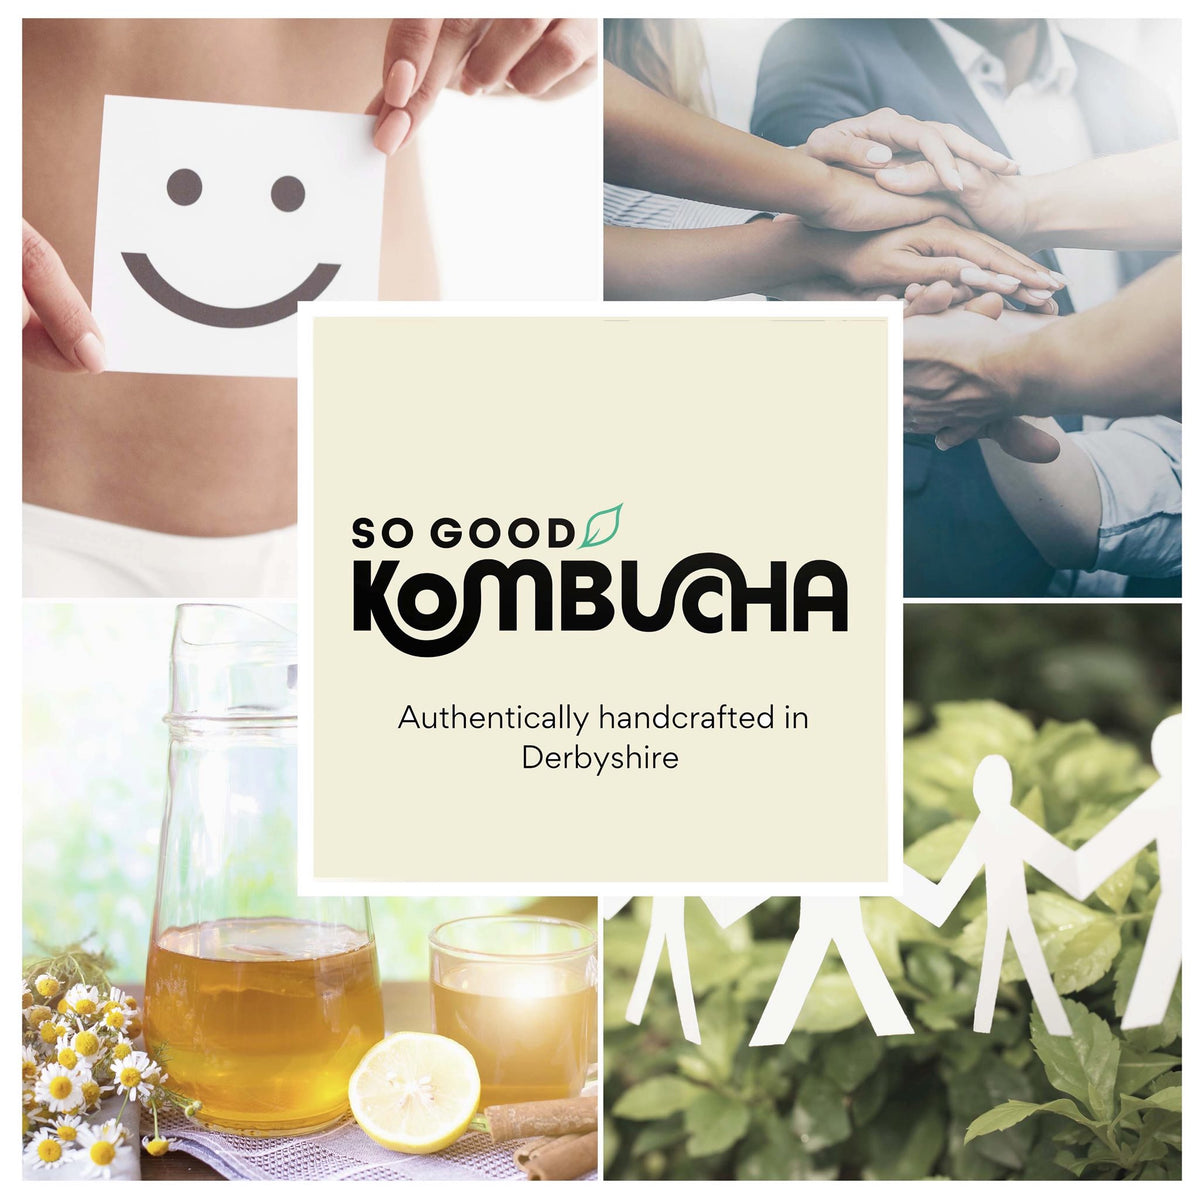 So Good Kombucha UK why are we so good - our ethics policy